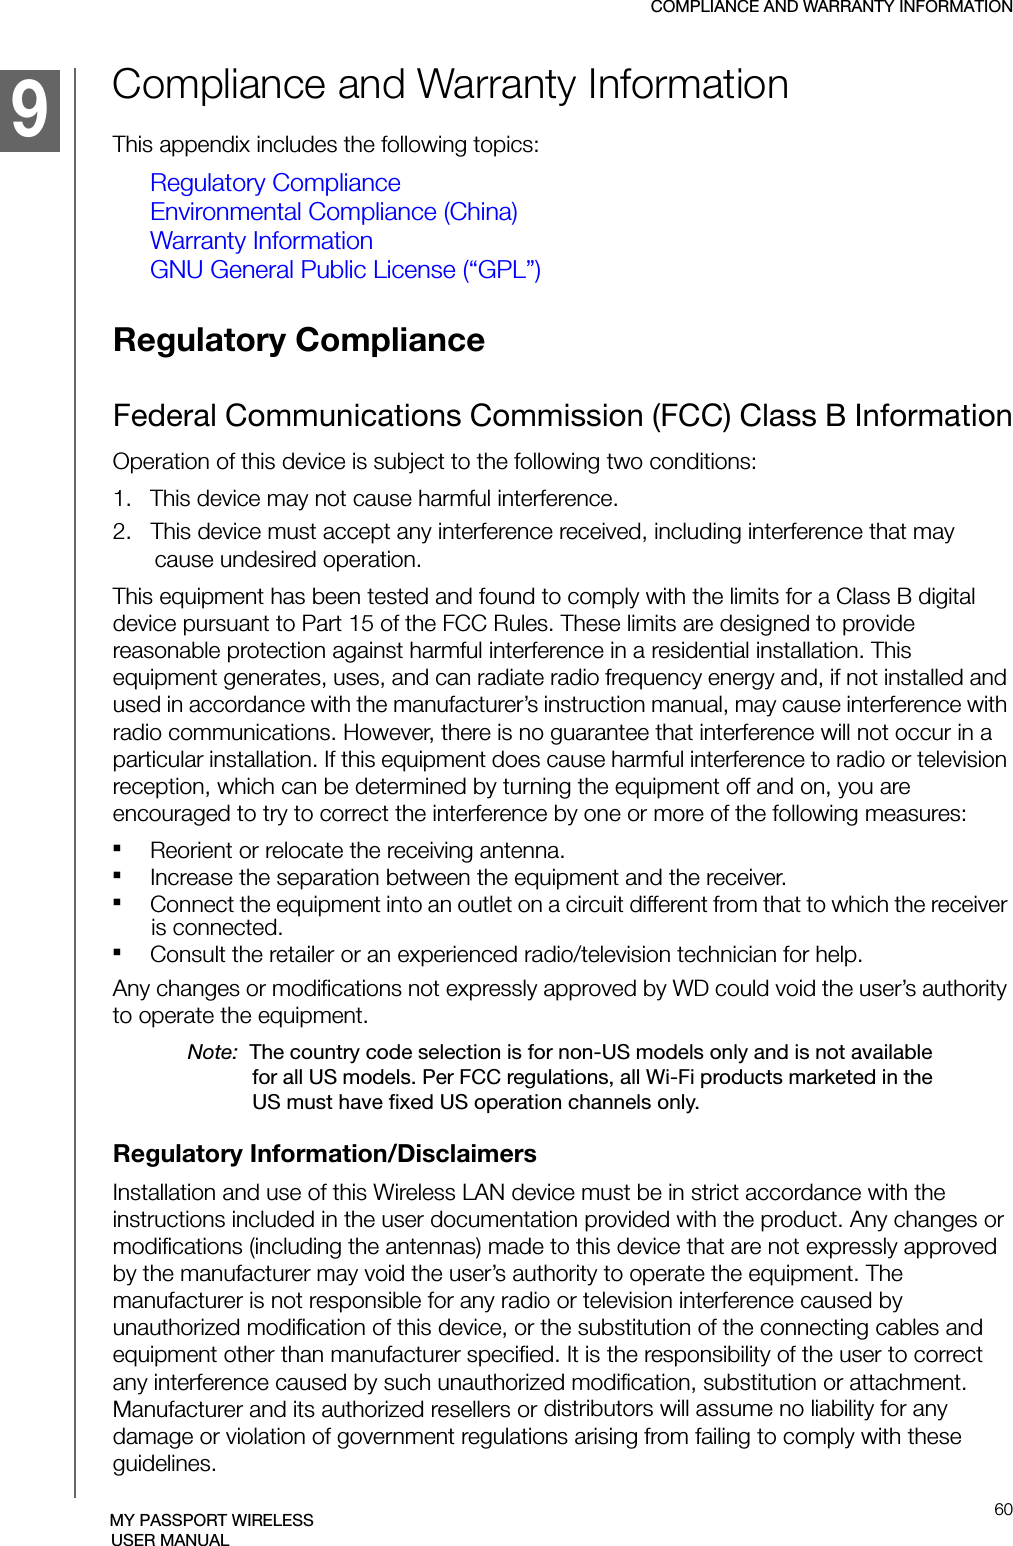 COMPLIANCE AND WARRANTY INFORMATION60MY PASSPORT WIRELESSUSER MANUALCompliance and Warranty InformationThis appendix includes the following topics: Regulatory ComplianceEnvironmental Compliance (China)Warranty InformationGNU General Public License (“GPL”)Regulatory Compliance Federal Communications Commission (FCC) Class B InformationOperation of this device is subject to the following two conditions:1.   This device may not cause harmful interference.2.   This device must accept any interference received, including interference that may cause undesired operation.This equipment has been tested and found to comply with the limits for a Class B digital device pursuant to Part 15 of the FCC Rules. These limits are designed to provide reasonable protection against harmful interference in a residential installation. This equipment generates, uses, and can radiate radio frequency energy and, if not installed and used in accordance with the manufacturer’s instruction manual, may cause interference with radio communications. However, there is no guarantee that interference will not occur in a particular installation. If this equipment does cause harmful interference to radio or television reception, which can be determined by turning the equipment off and on, you are encouraged to try to correct the interference by one or more of the following measures: Reorient or relocate the receiving antenna.Increase the separation between the equipment and the receiver.Connect the equipment into an outlet on a circuit different from that to which the receiver is connected.Consult the retailer or an experienced radio/television technician for help.Any changes or modifications not expressly approved by WD could void the user’s authority to operate the equipment.Note:  The country code selection is for non-US models only and is not available for all US models. Per FCC regulations, all Wi-Fi products marketed in the US must have fixed US operation channels only.Regulatory Information/DisclaimersInstallation and use of this Wireless LAN device must be in strict accordance with the instructions included in the user documentation provided with the product. Any changes or modifications (including the antennas) made to this device that are not expressly approved by the manufacturer may void the user’s authority to operate the equipment. The manufacturer is not responsible for any radio or television interference caused by unauthorized modification of this device, or the substitution of the connecting cables and equipment other than manufacturer specified. It is the responsibility of the user to correct any interference caused by such unauthorized modification, substitution or attachment. Manufacturer and its authorized resellers or distributors will assume no liability for any damage or violation of government regulations arising from failing to comply with these guidelines.51219